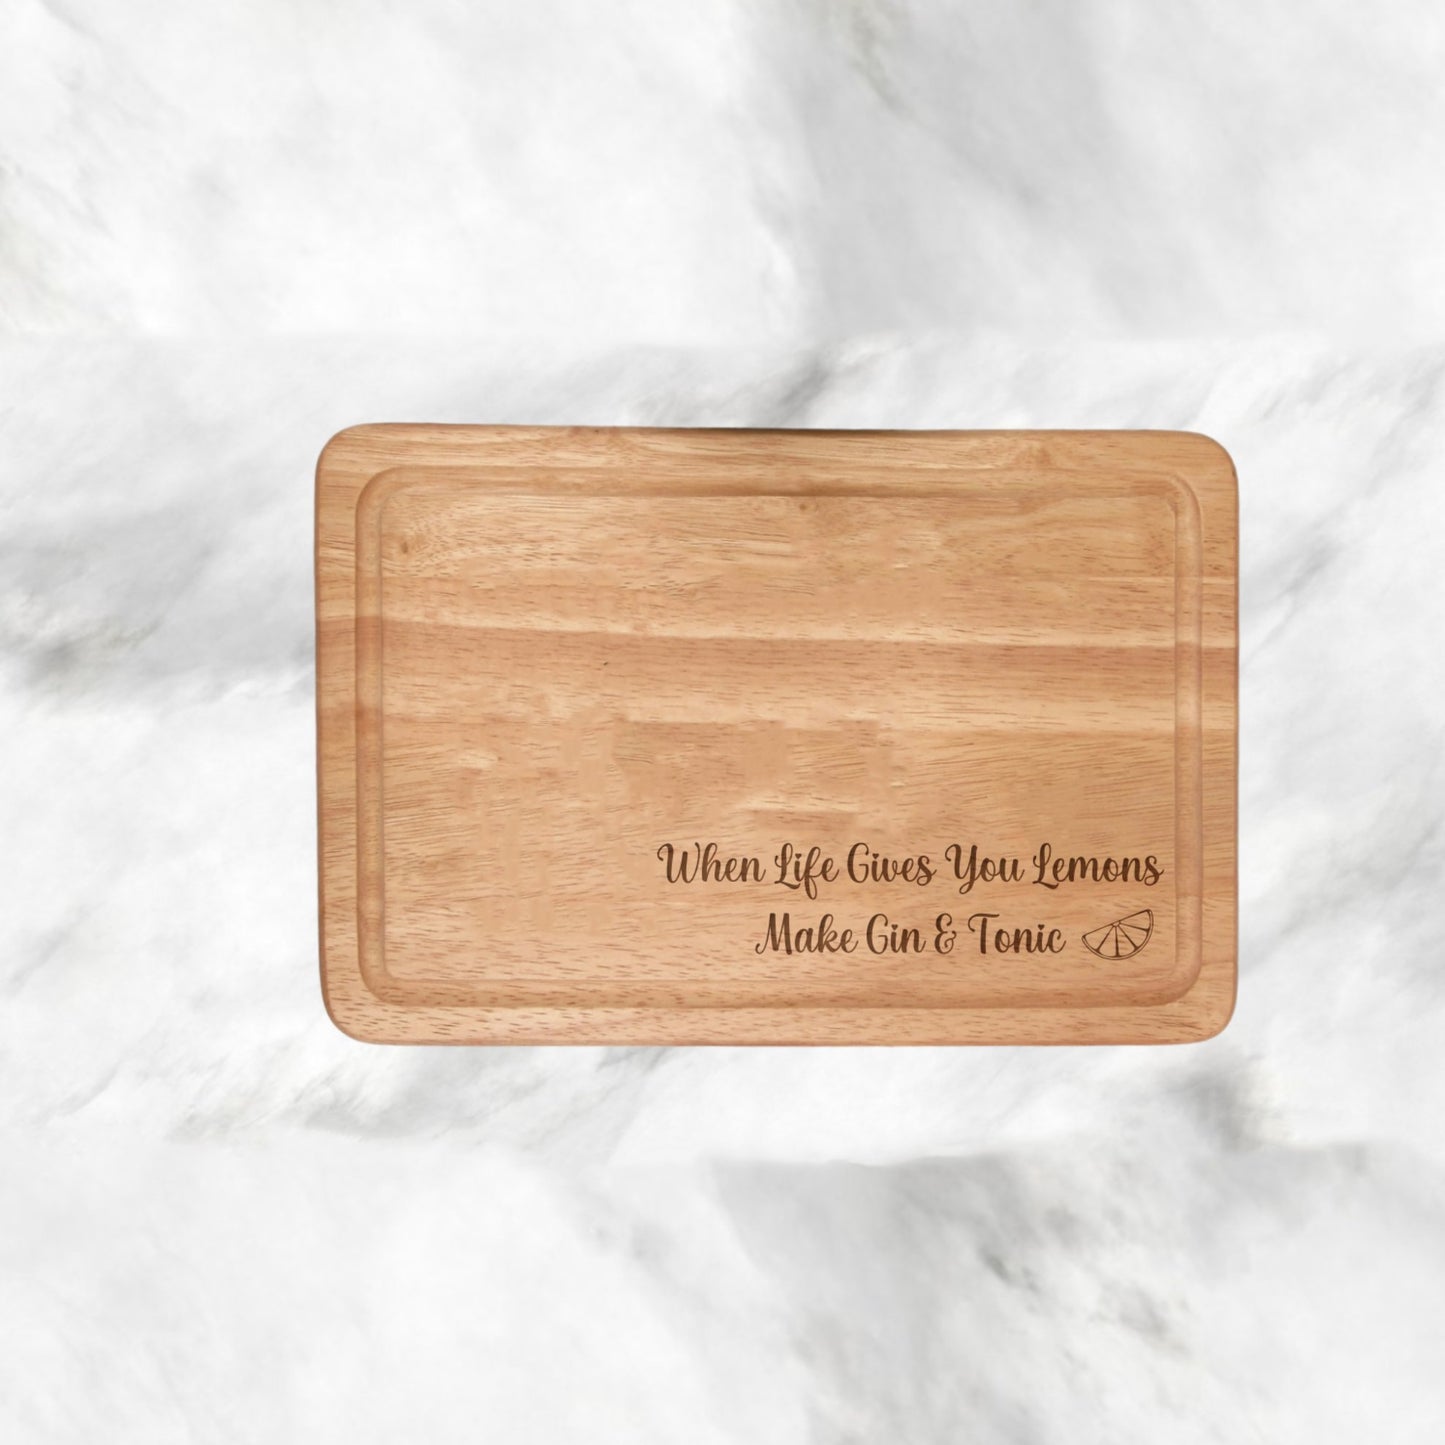 Engraved 'When Life Gives You Lemons, Make Gin & Tonic' chopping board - 300mmX200mm size, timeless design, fade-resistant charm. Elevate your kitchen with a click! With lemon engraved . All engraving is on bottom left of board. 